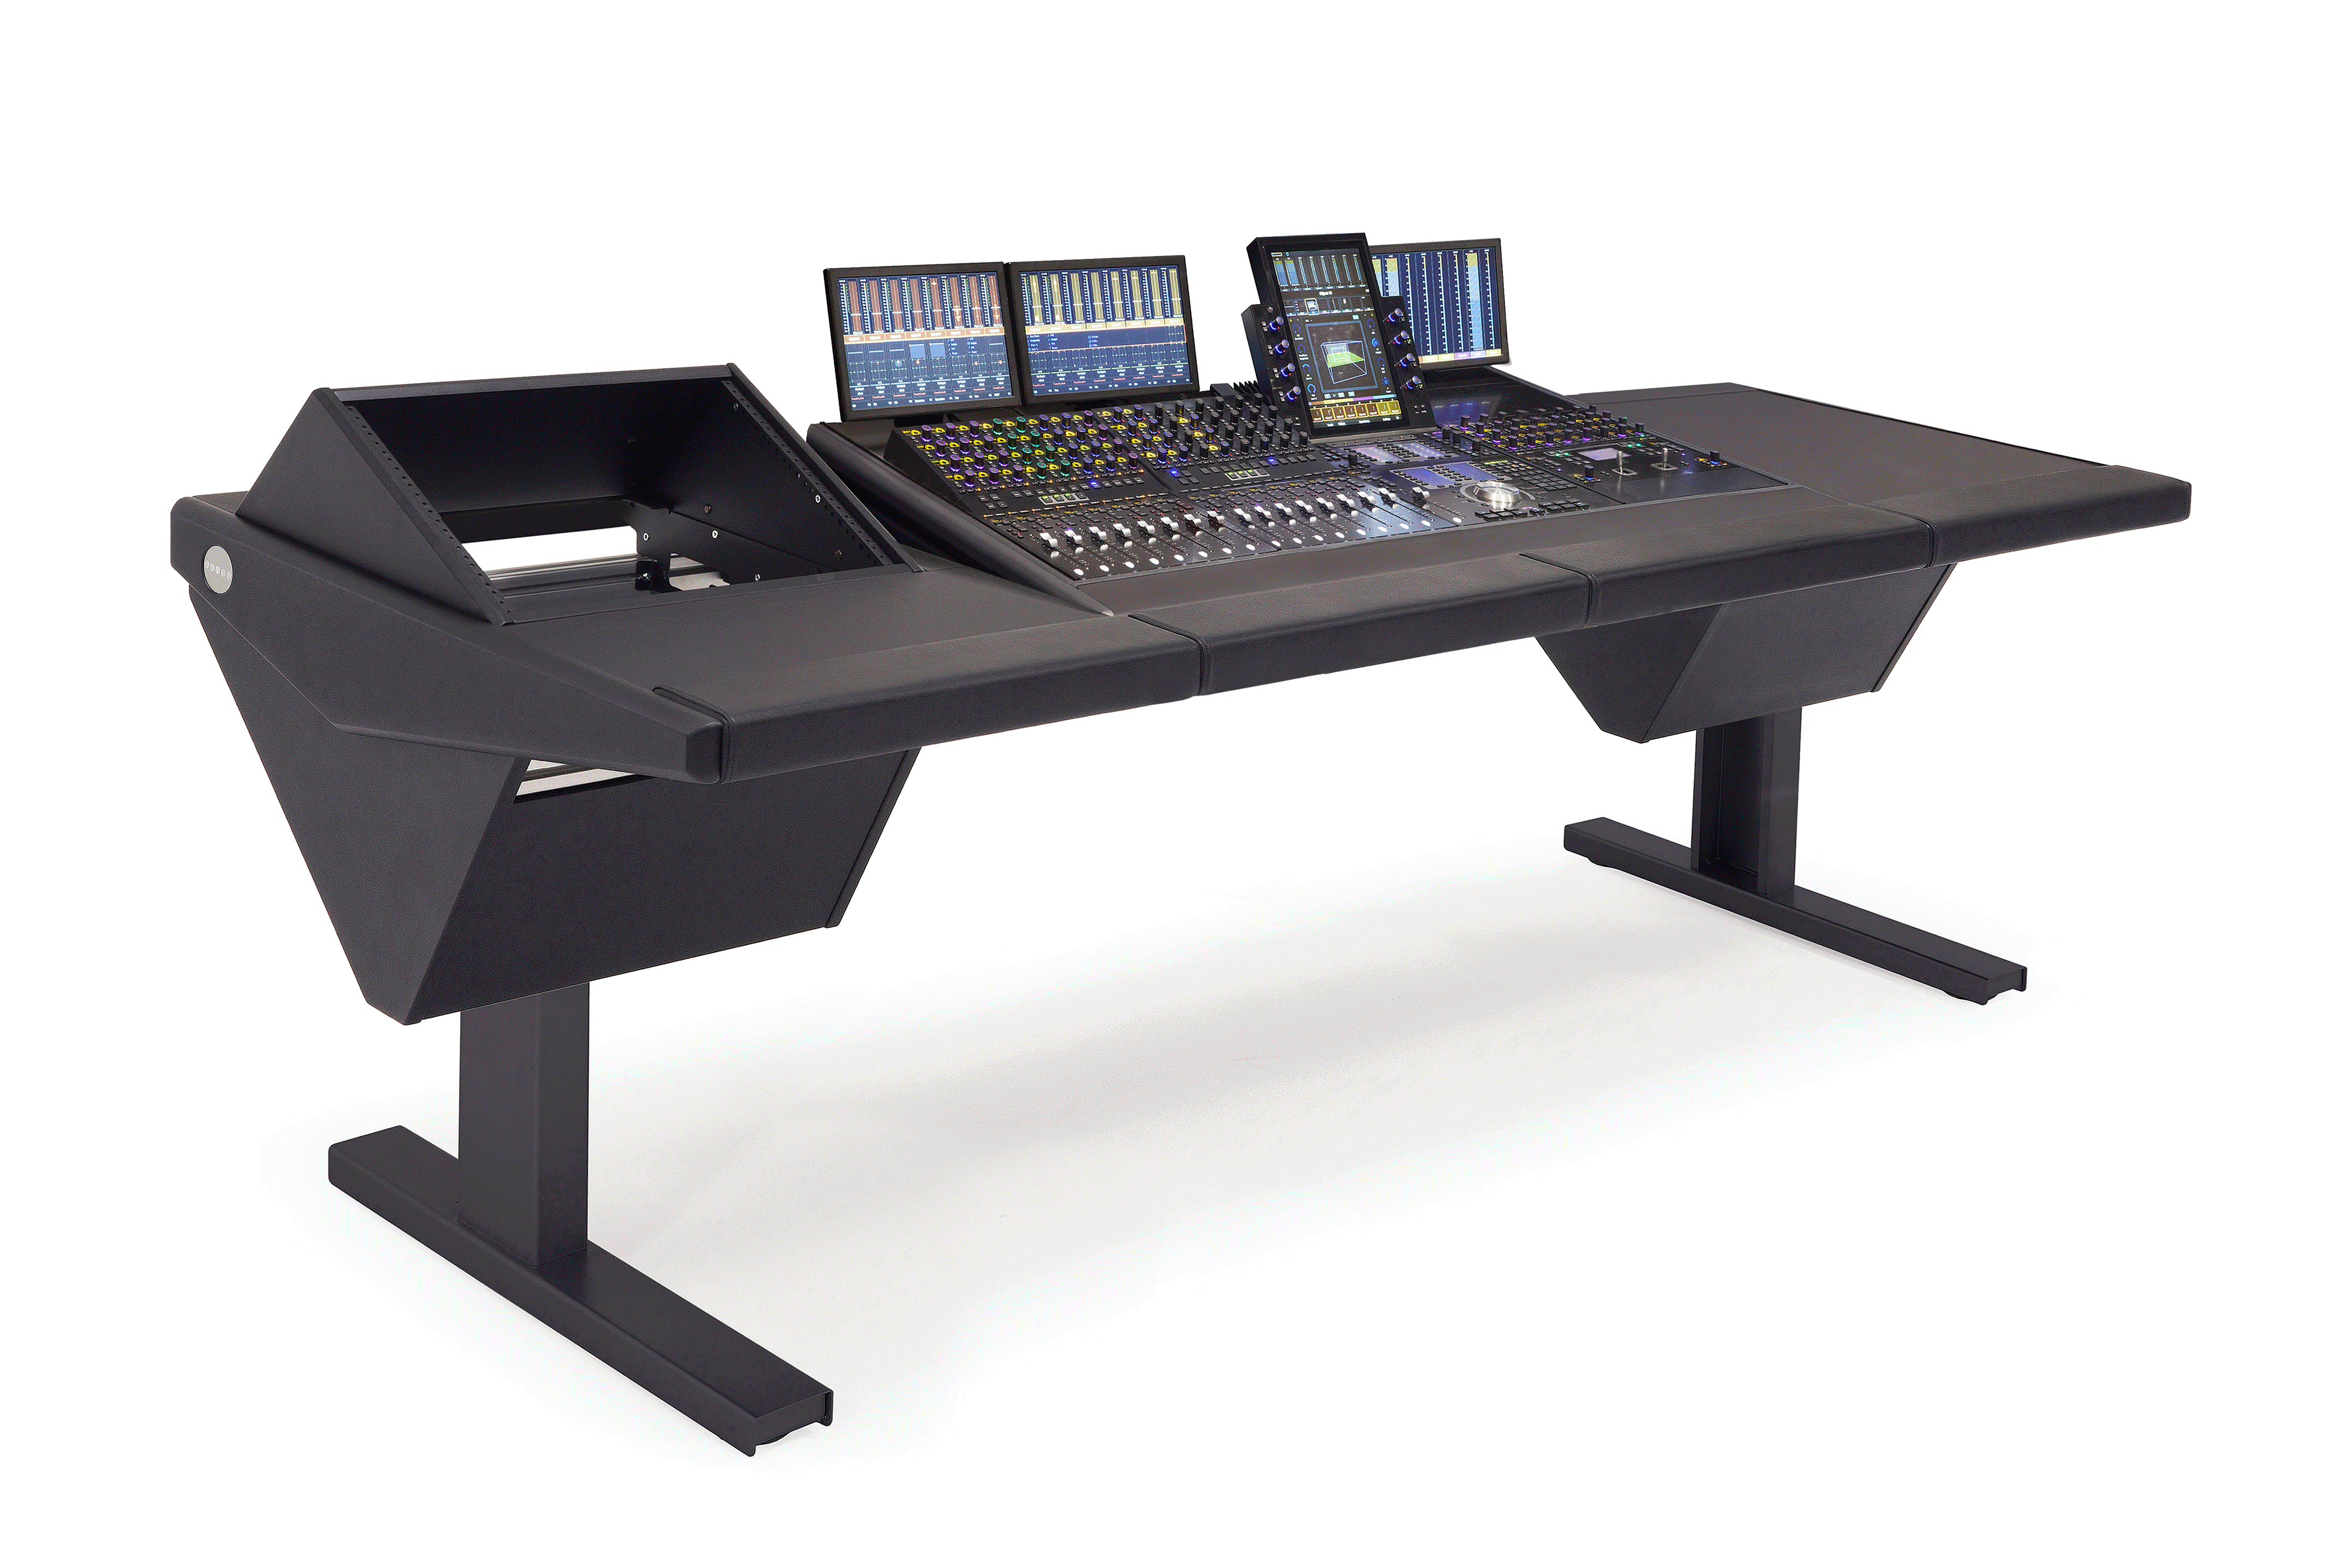 S4 - 4 Foot Wide Base System with Rack (L) and Desk (R)